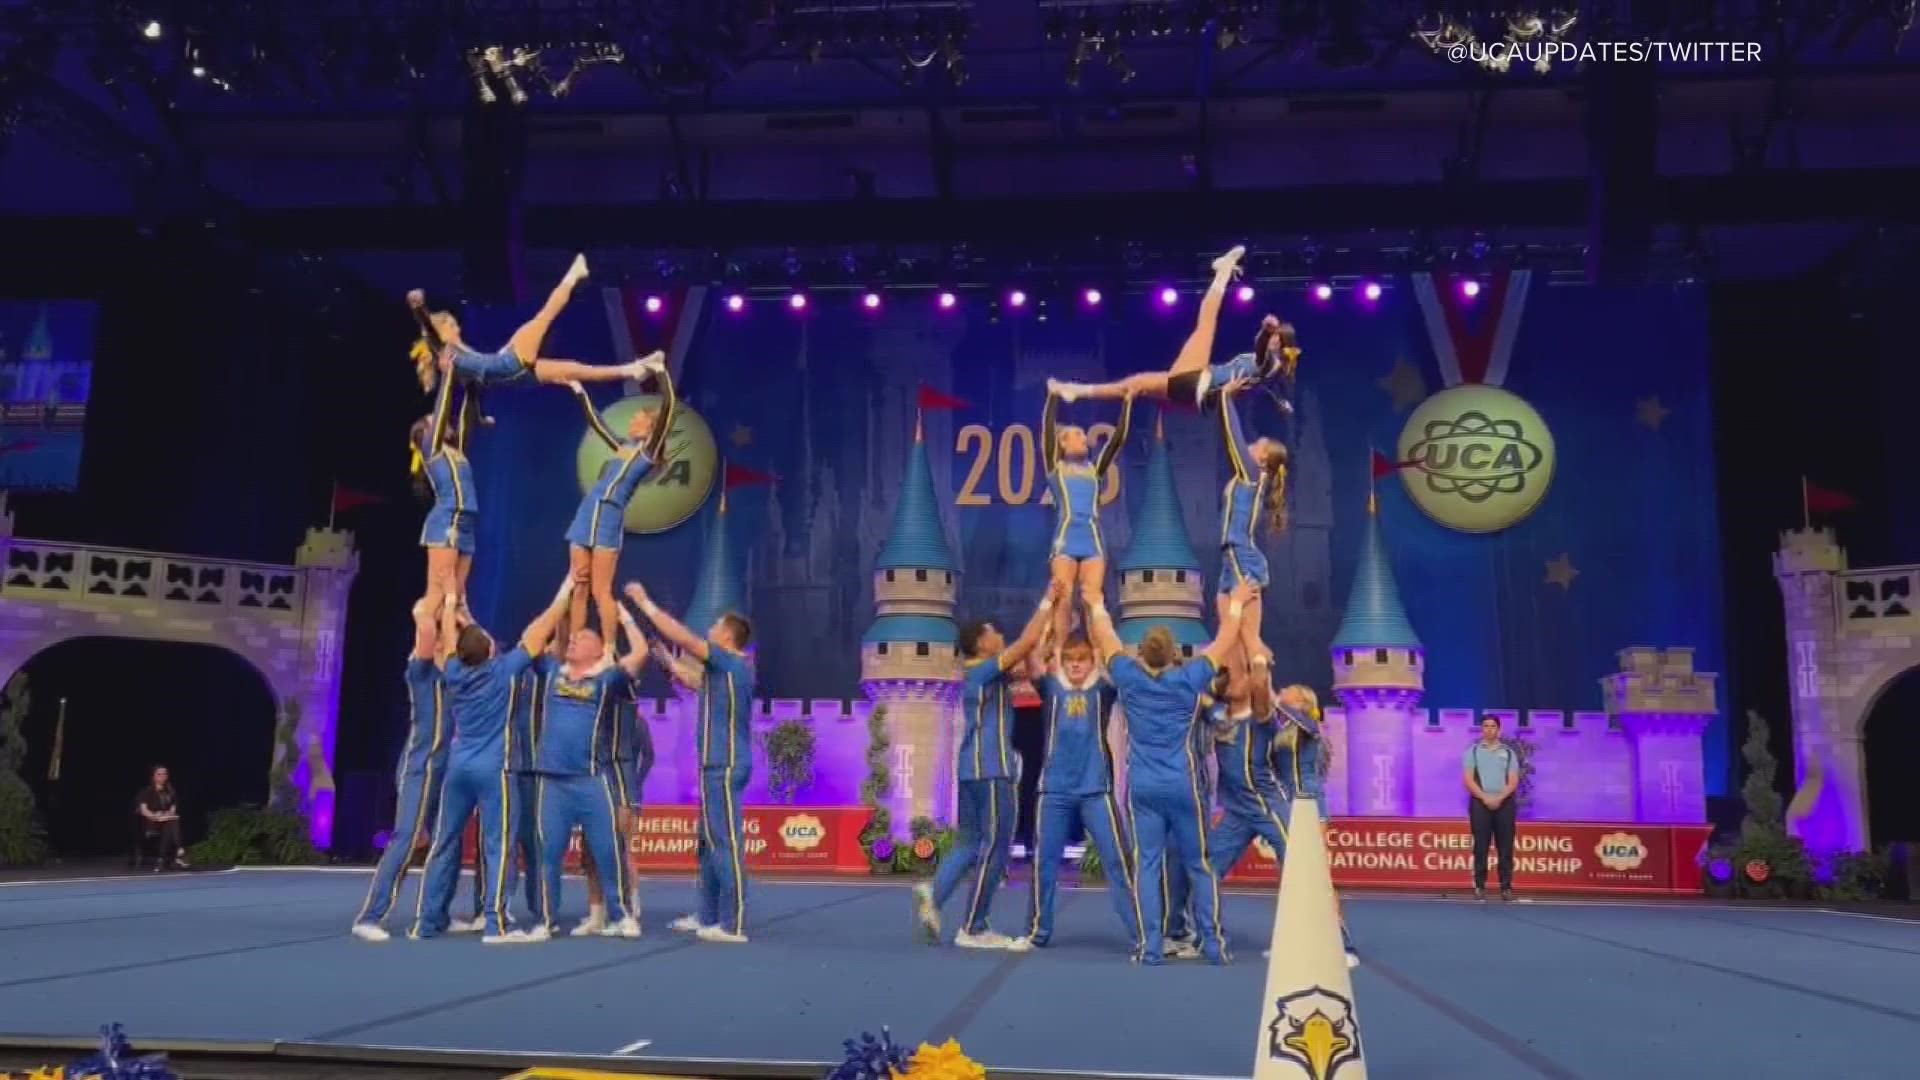 Morehead State University and Western Kentucky University won first place at the Universal Cheerleading Association College Nationals in their own competitions.